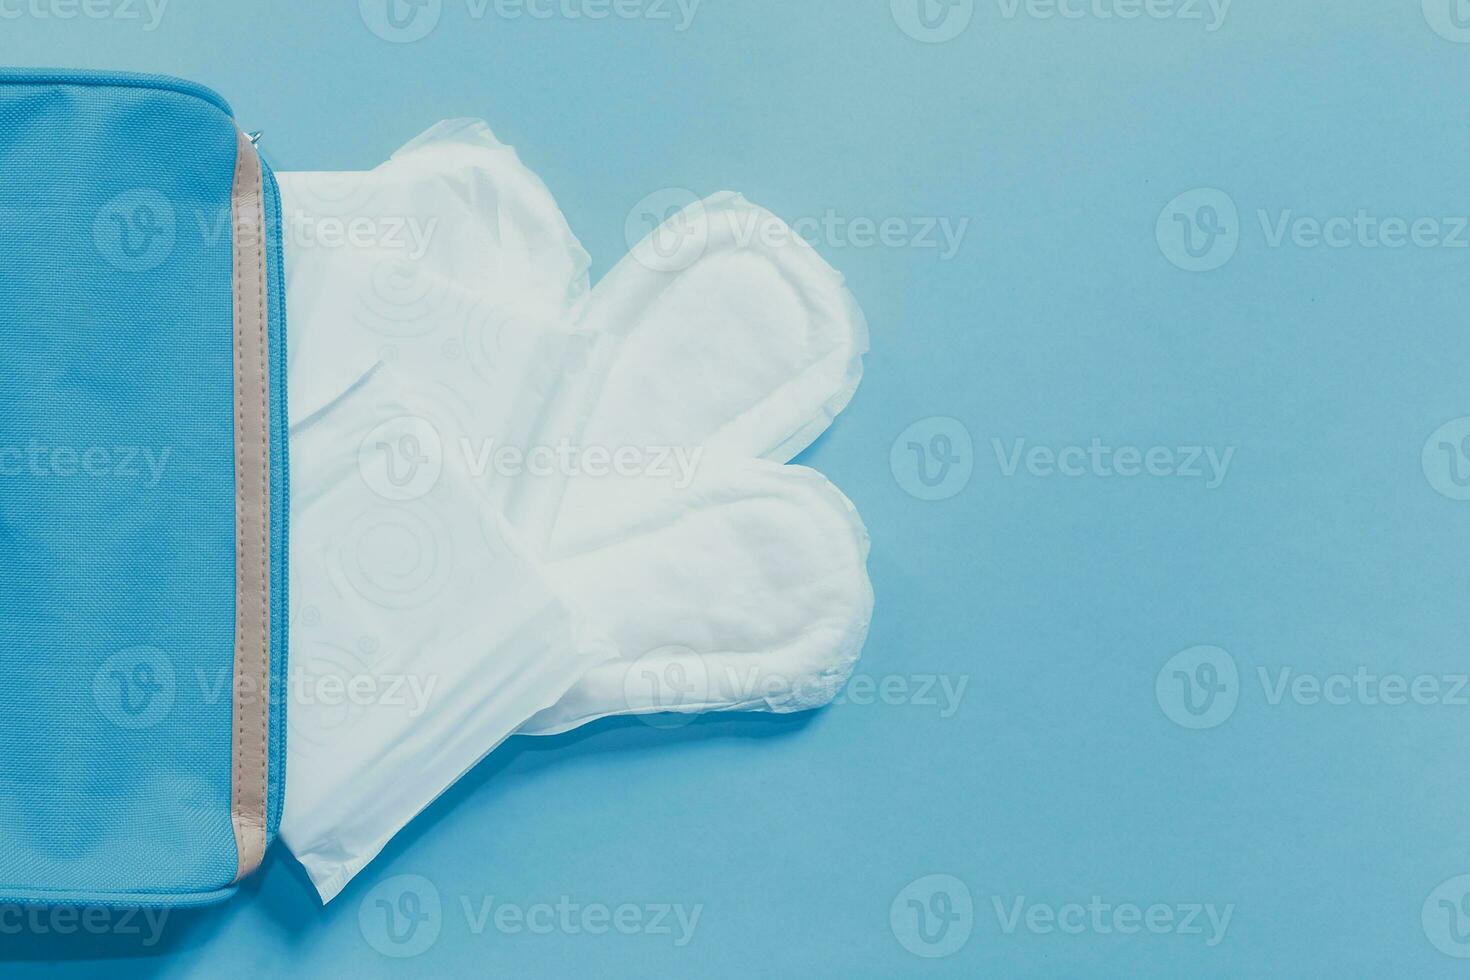 Female's hygiene products. Women's bag and sanitary pads on blue background photo